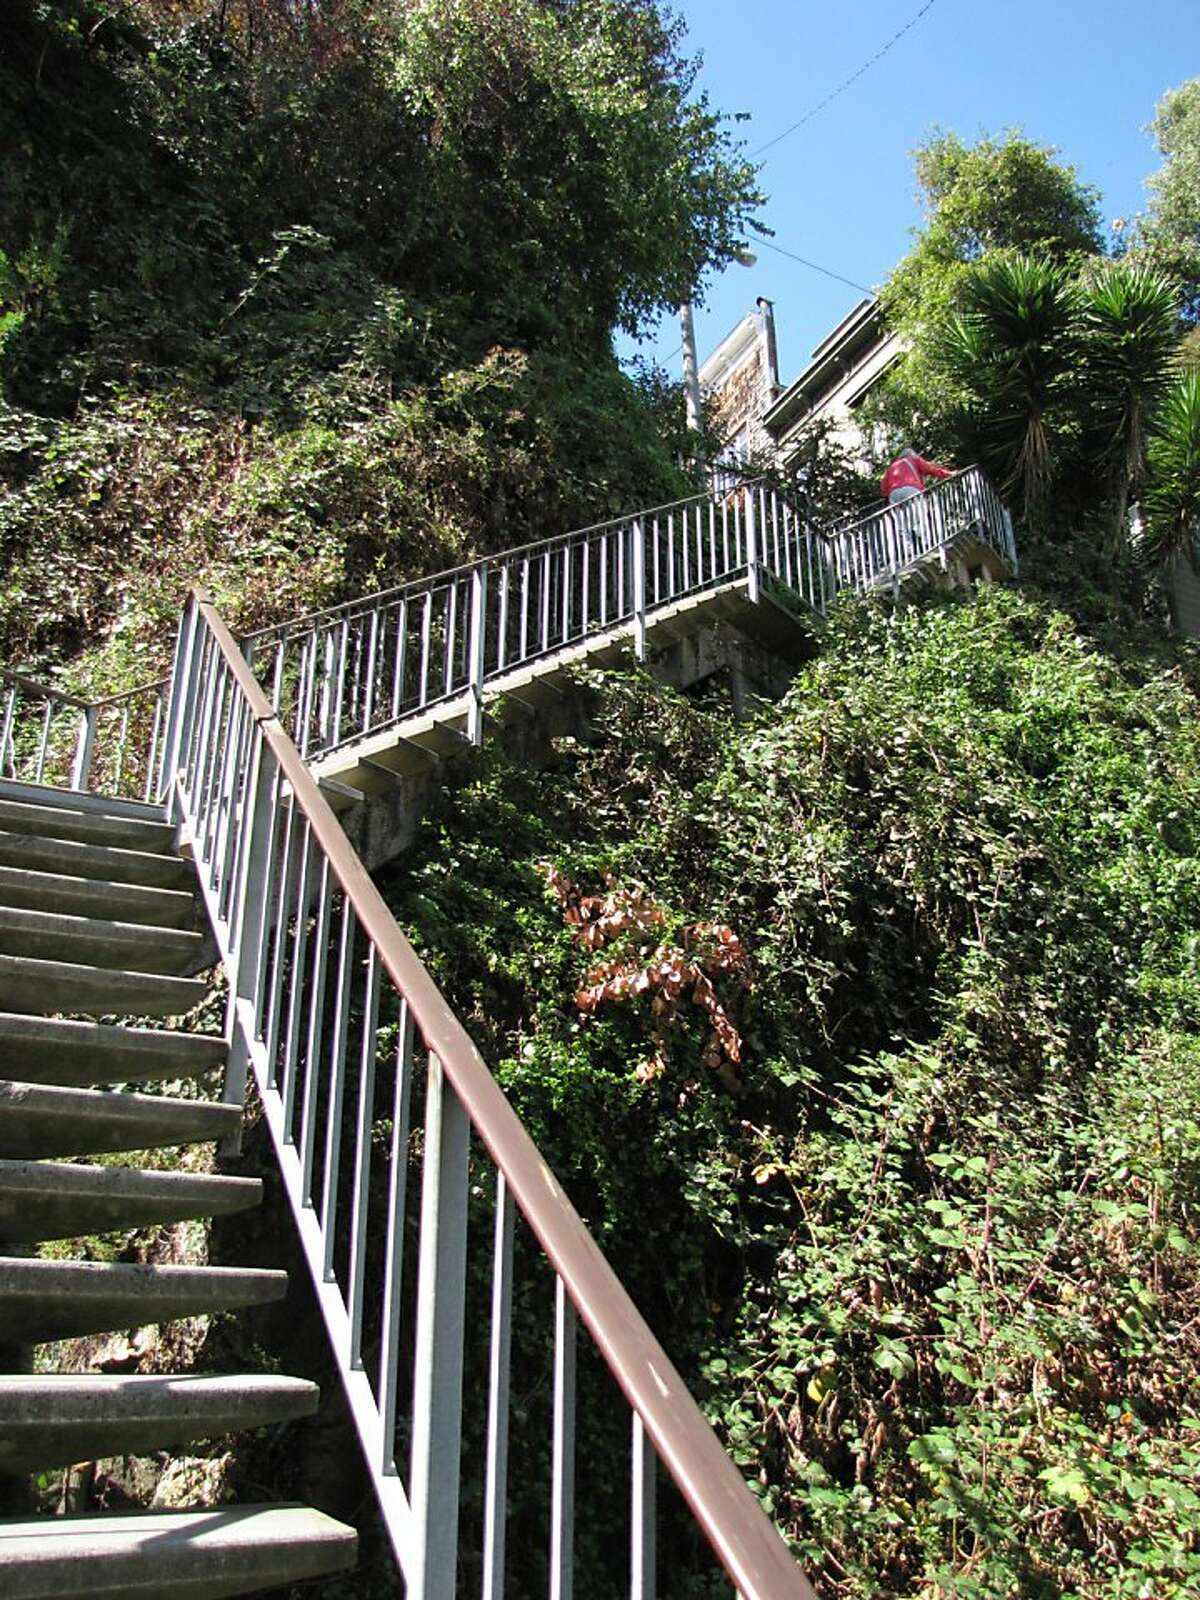 The Filbert Steps that ascend from the northeast waterfront to the top of Telegraph Hill are among the wonders of San Francisco, where city and landscape collide.